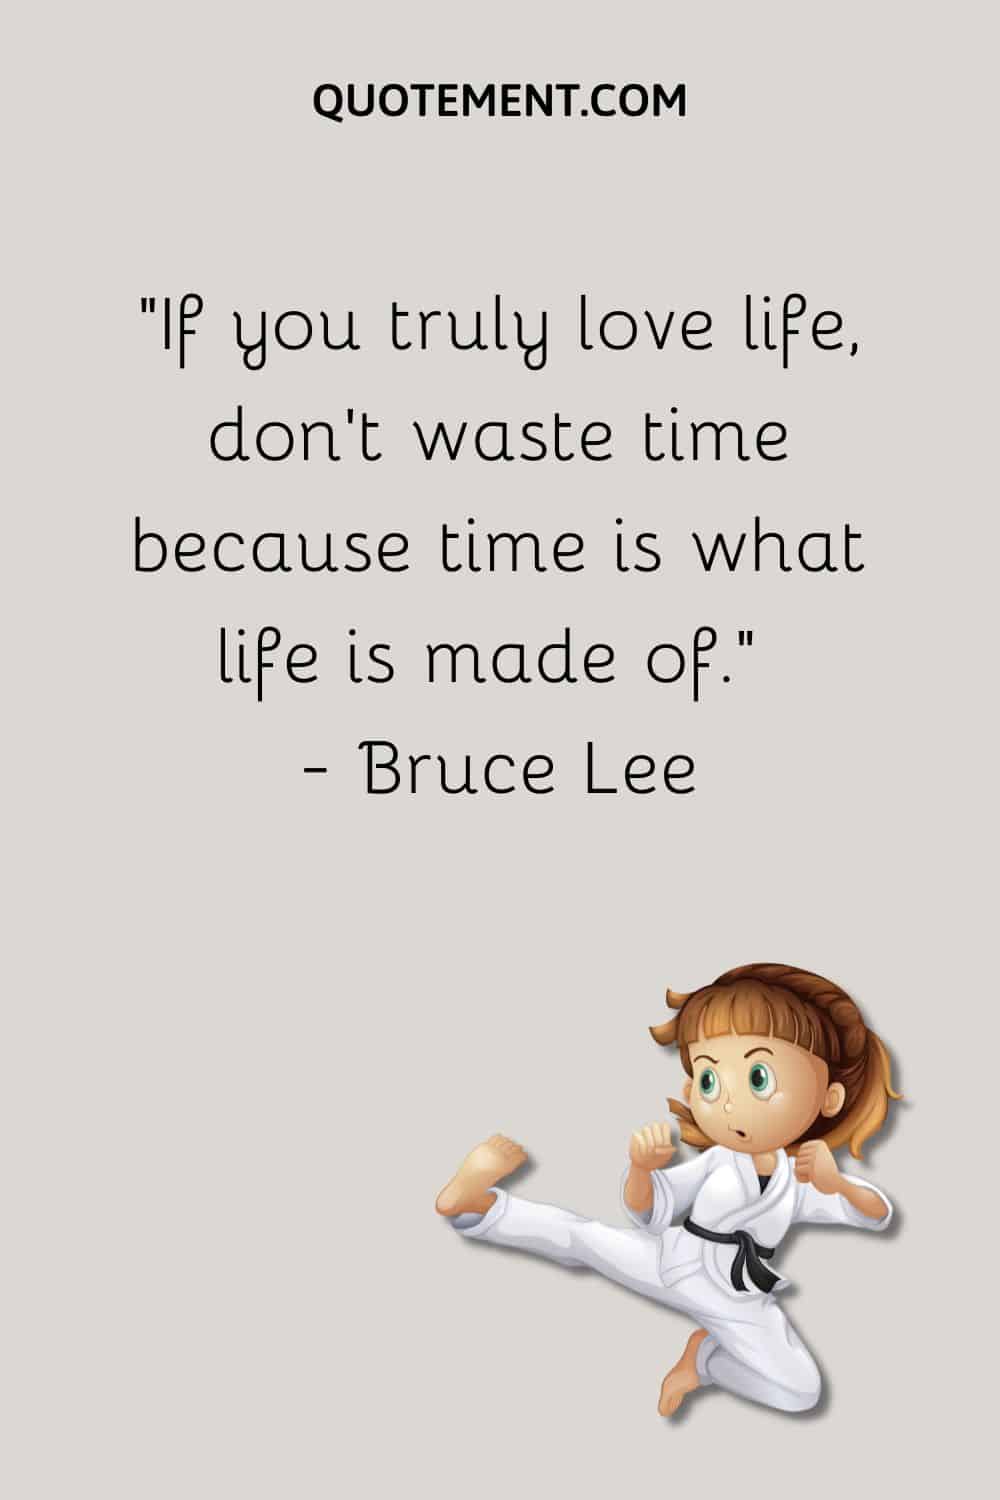 If you truly love life, don’t waste time because time is what life is made of